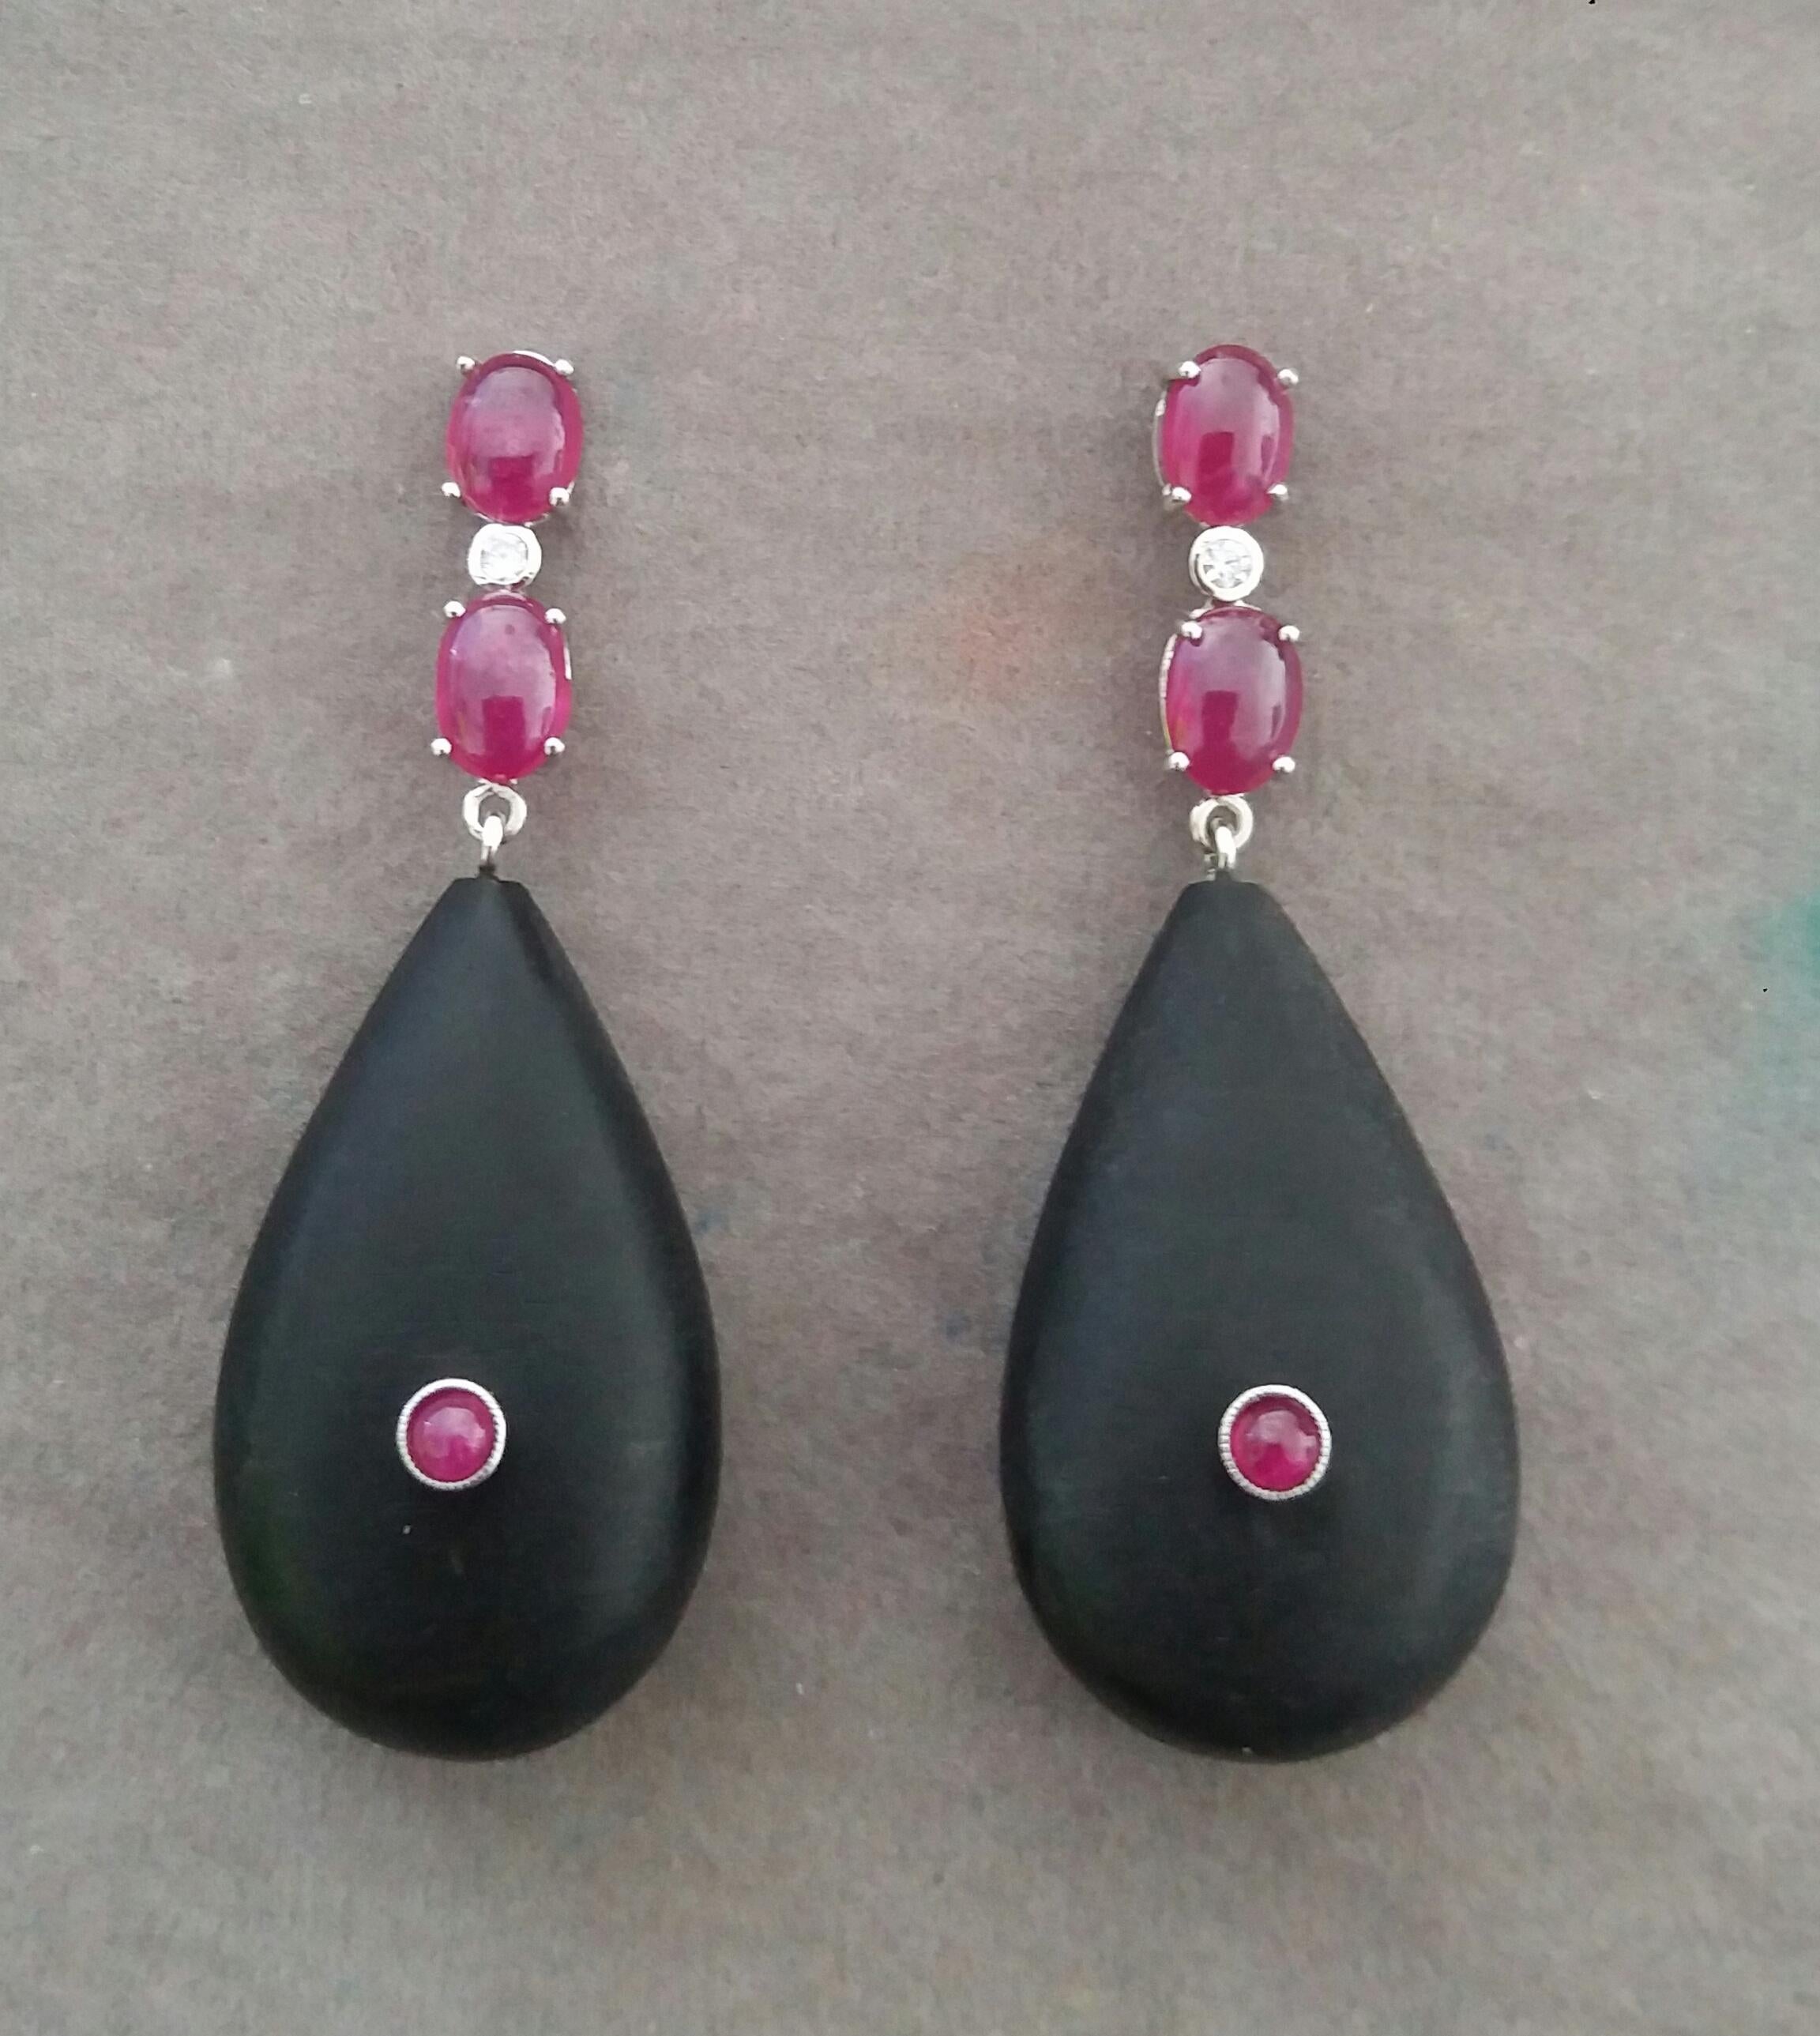 Elegant and completely handmade Earrings consisting of an upper part of 2 oval shape Ruby cabs of 4 mm x 5 mm set together in 14 Kt white gold with a  small diamond in the middle, at the bottom 2 Natural Ebony Plain Drops measuring 18 x 30 mm with a